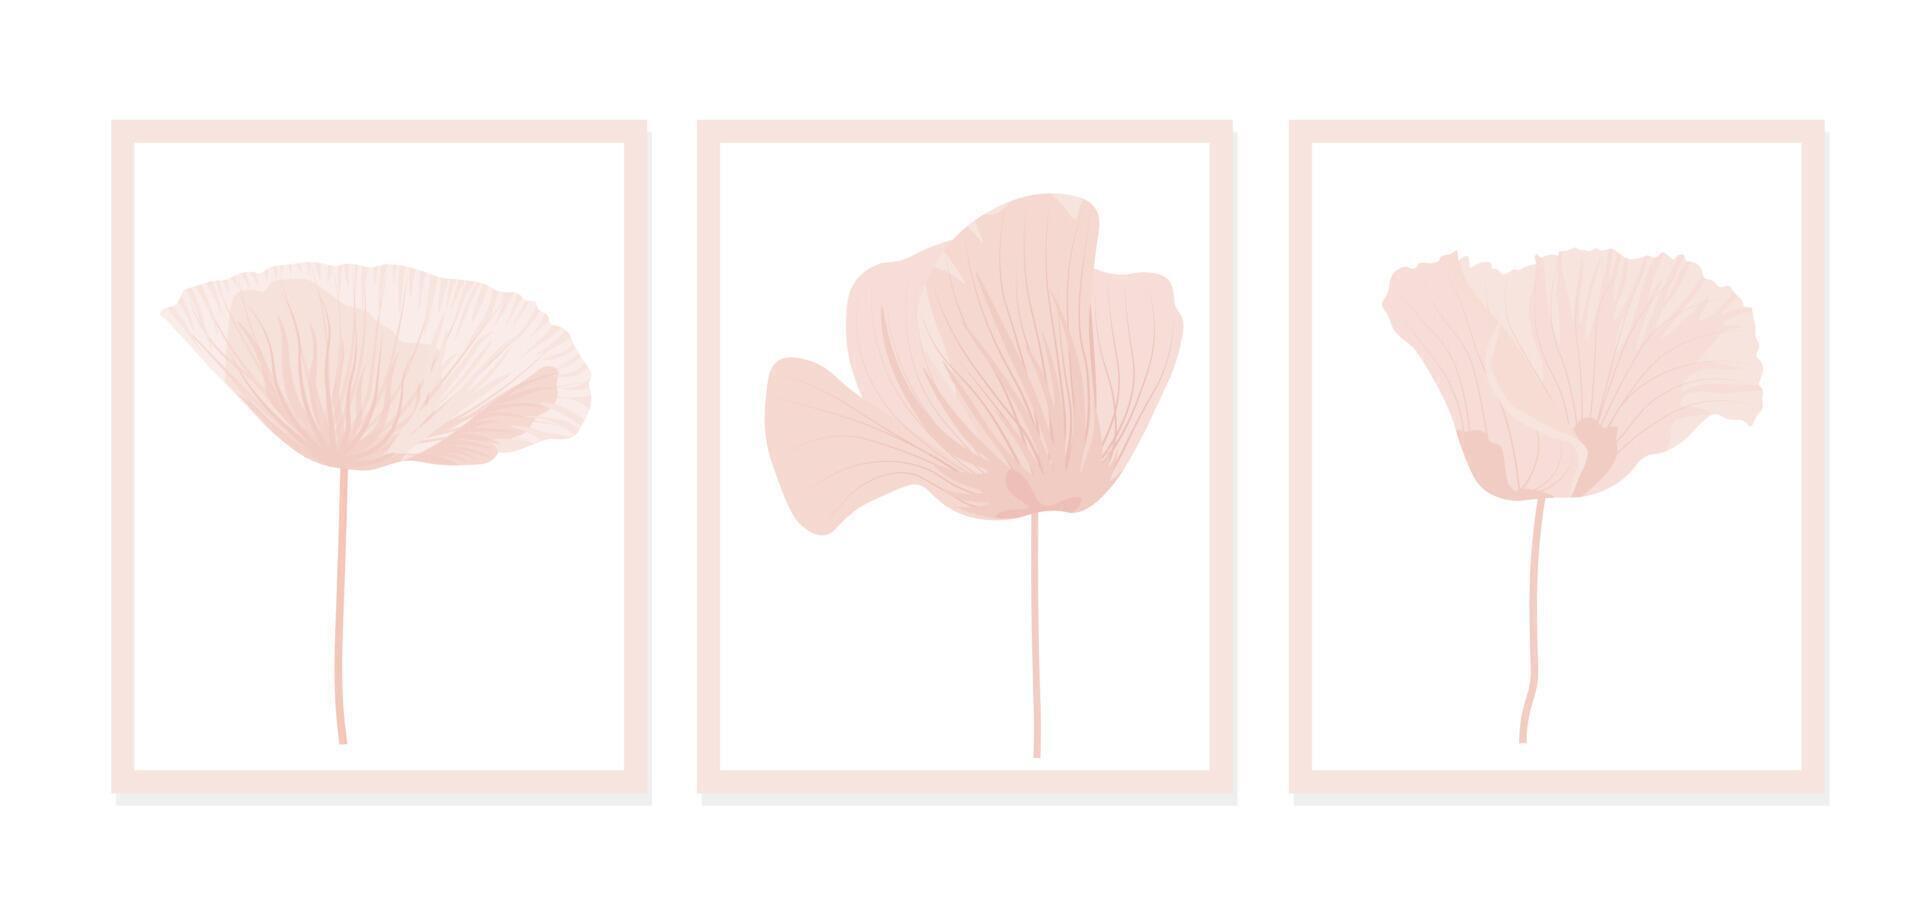 Set of pink flowers Illustrations for Wall Decoration, Postcard, Social Media Banner, Brochure Cover Design Background. Modern Abstract Painting Artwork. Vector Pattern